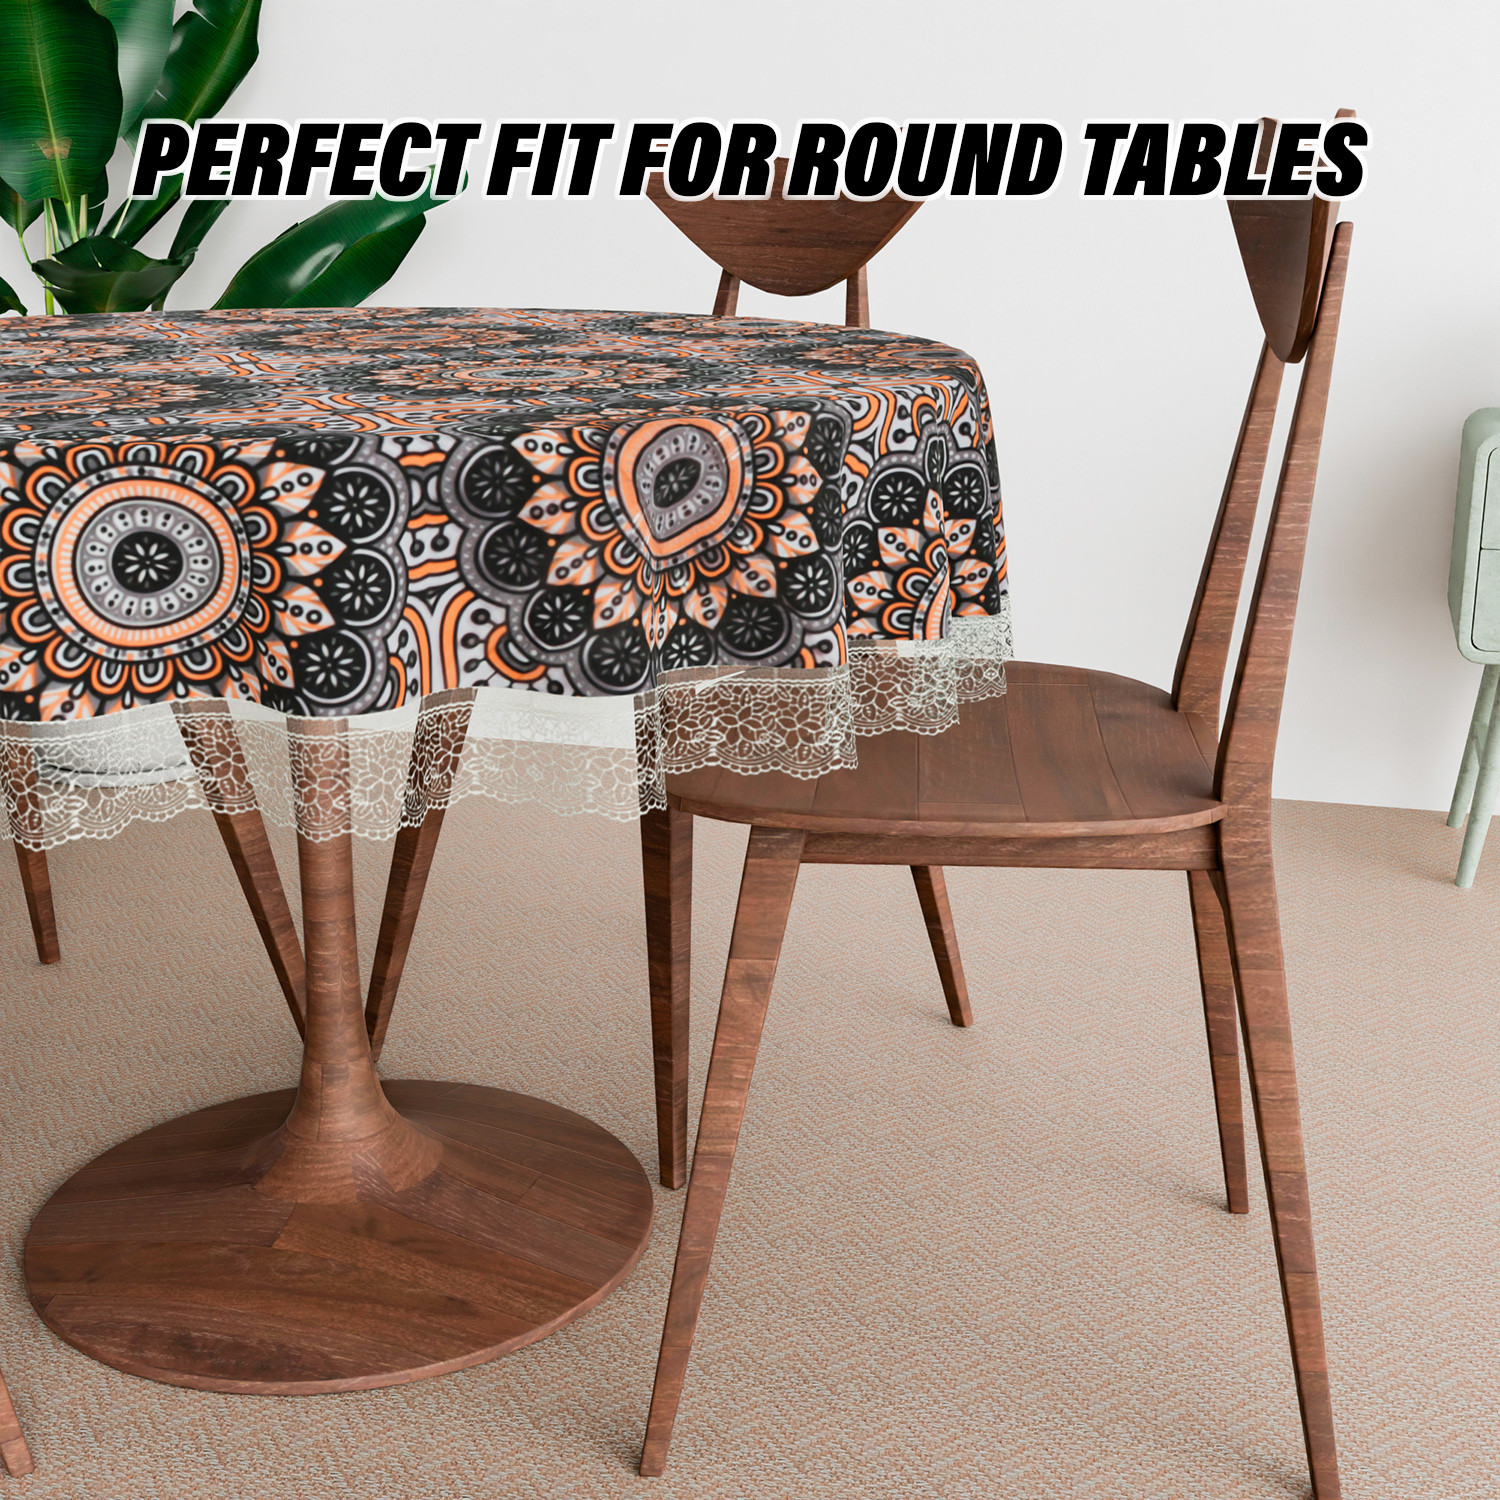 Kuber Industries Round Table Cover | PVC Table Cloth for Round Tables | 4 Seater Round Table Cloth | Rangoli Kitchen Dining Tablecloth | Tabletop Cover | 60 Inch | Black